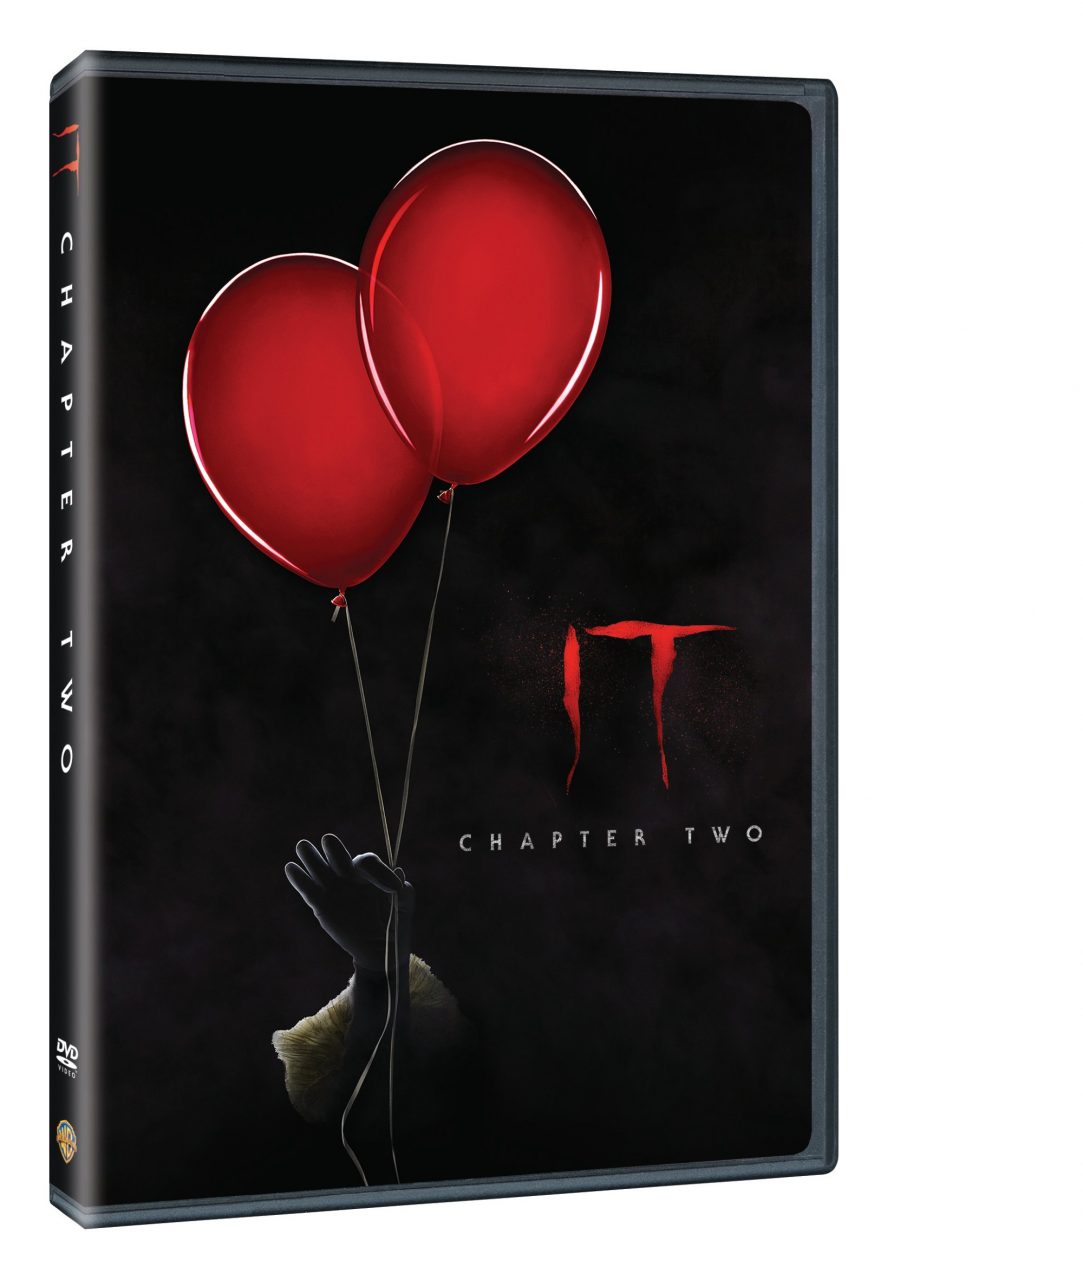 IT: Chapter 2 DVD cover (Warner Bros. Home Entertainment)